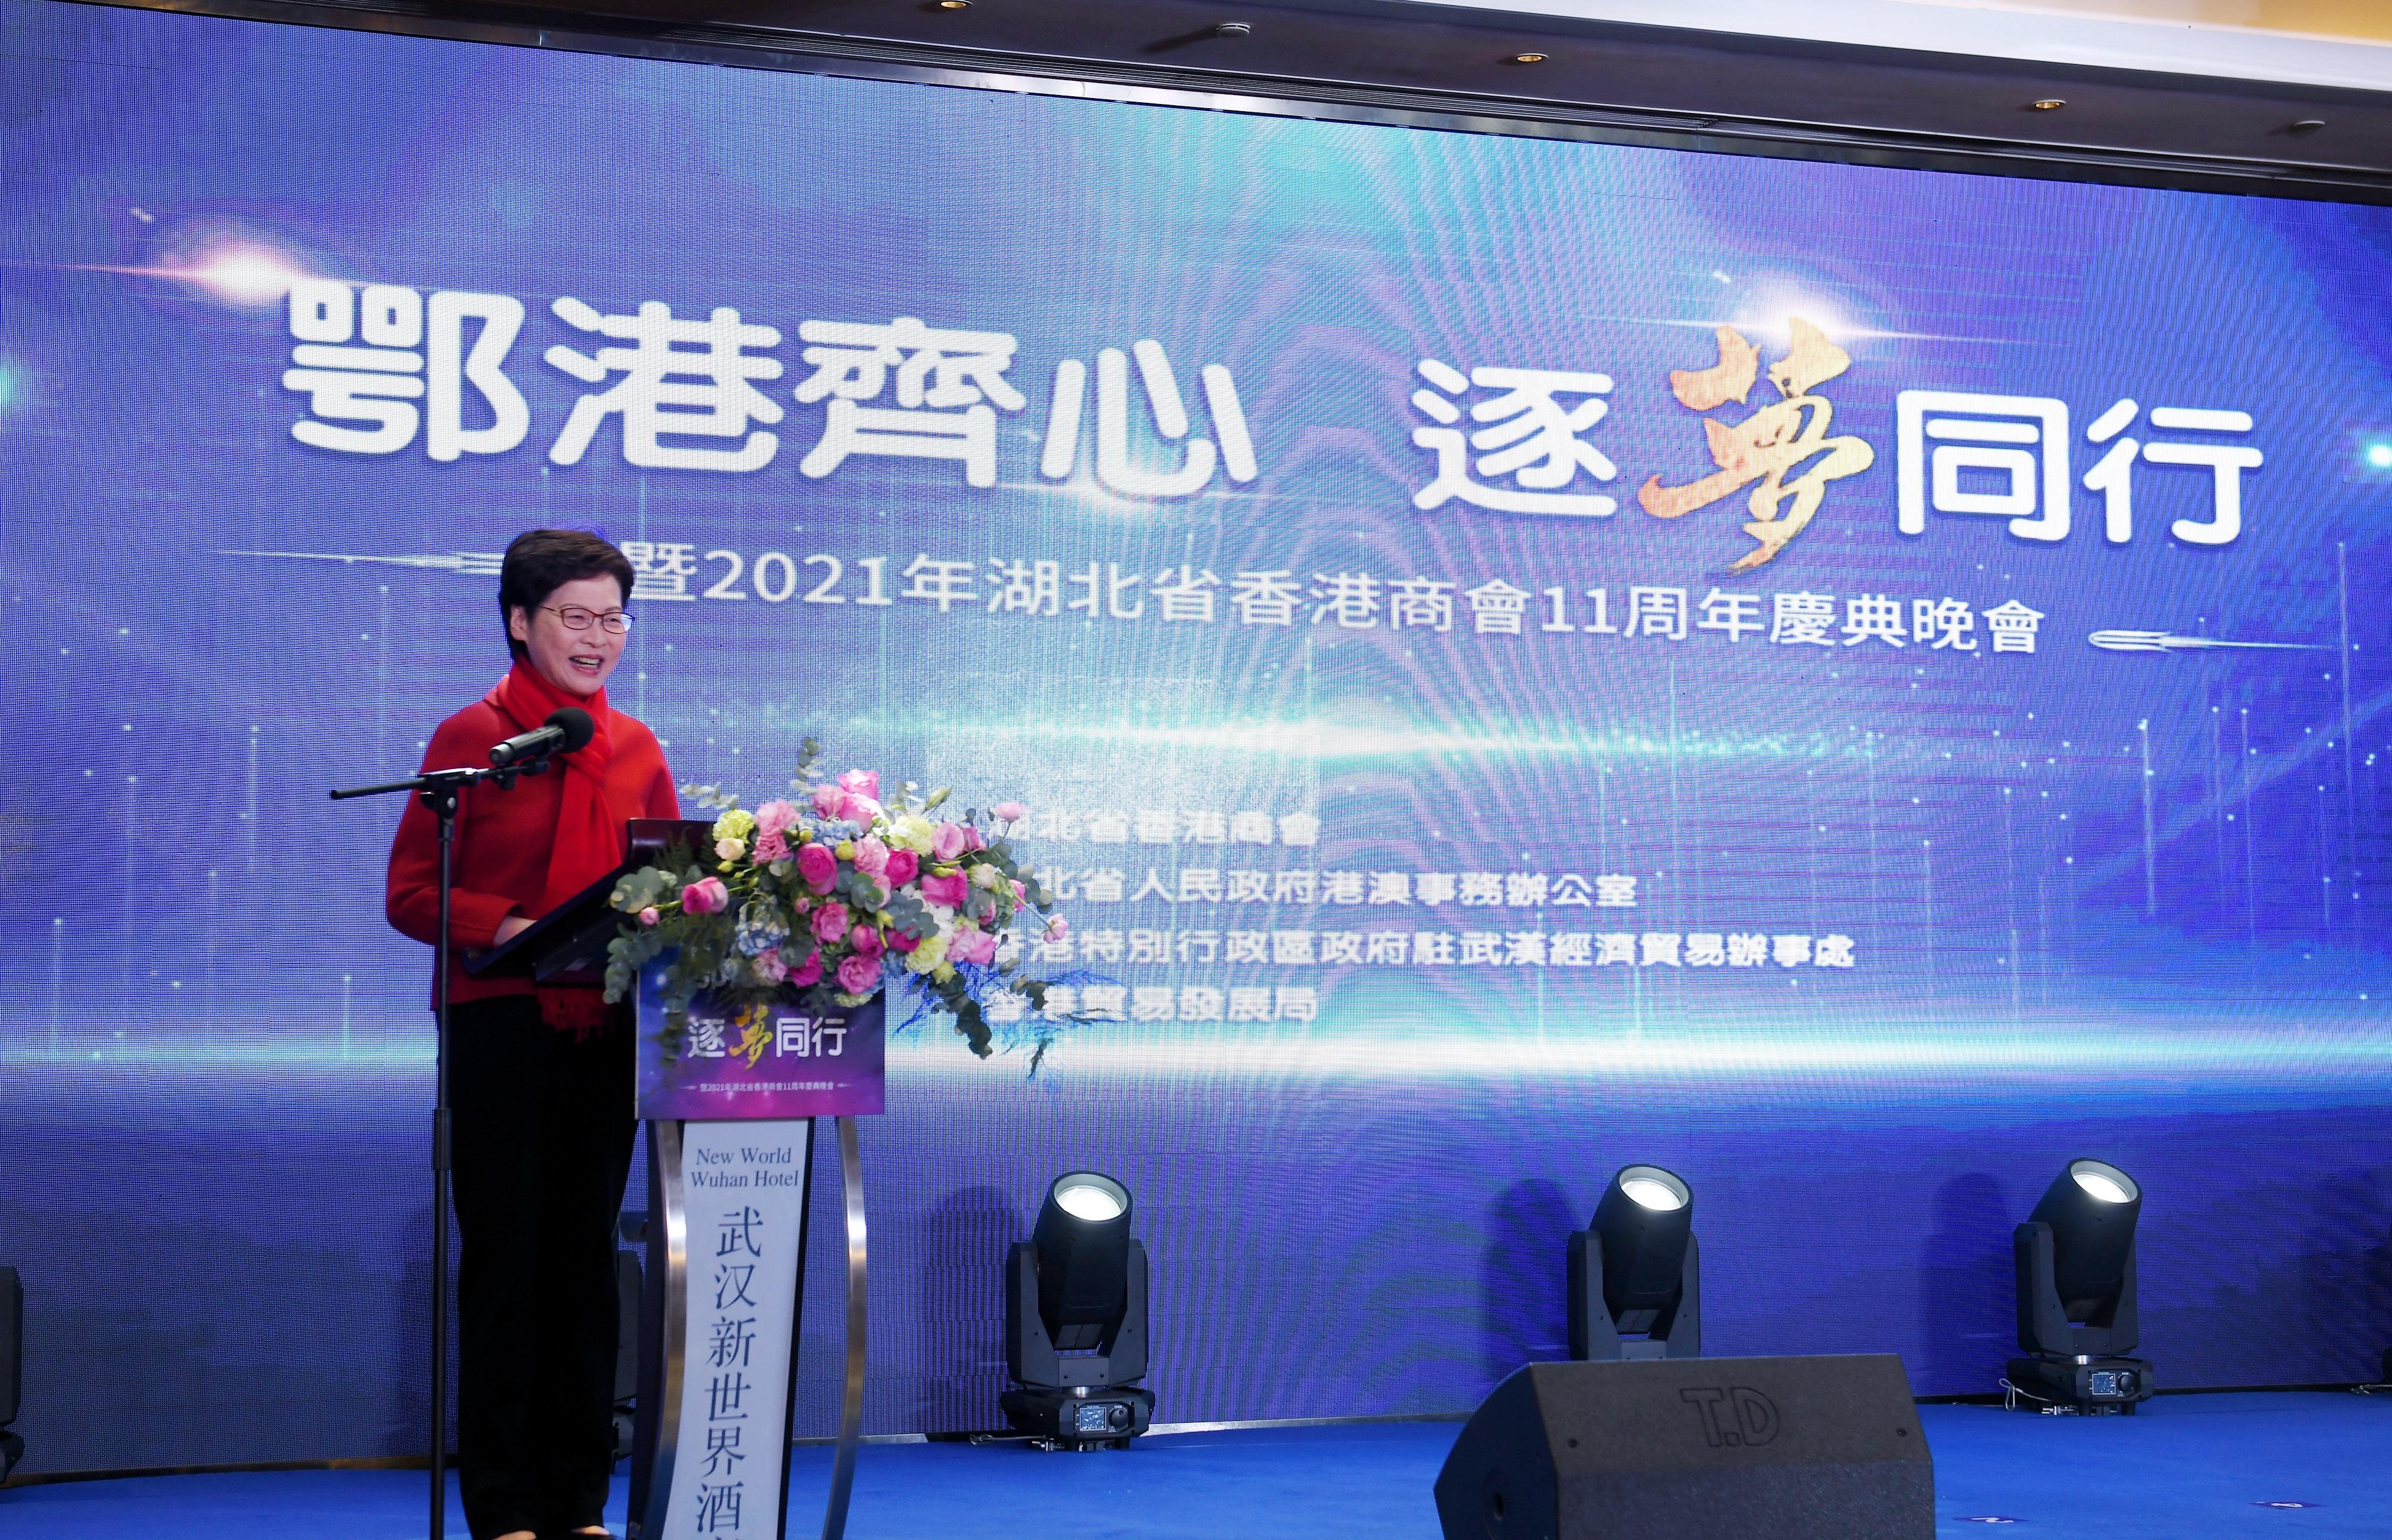 The Chief Executive, Mrs Carrie Lam, speaks at the 11th anniversary gala dinner of the Hong Kong Chamber of Commerce in Hubei in Wuhan today (November 30).